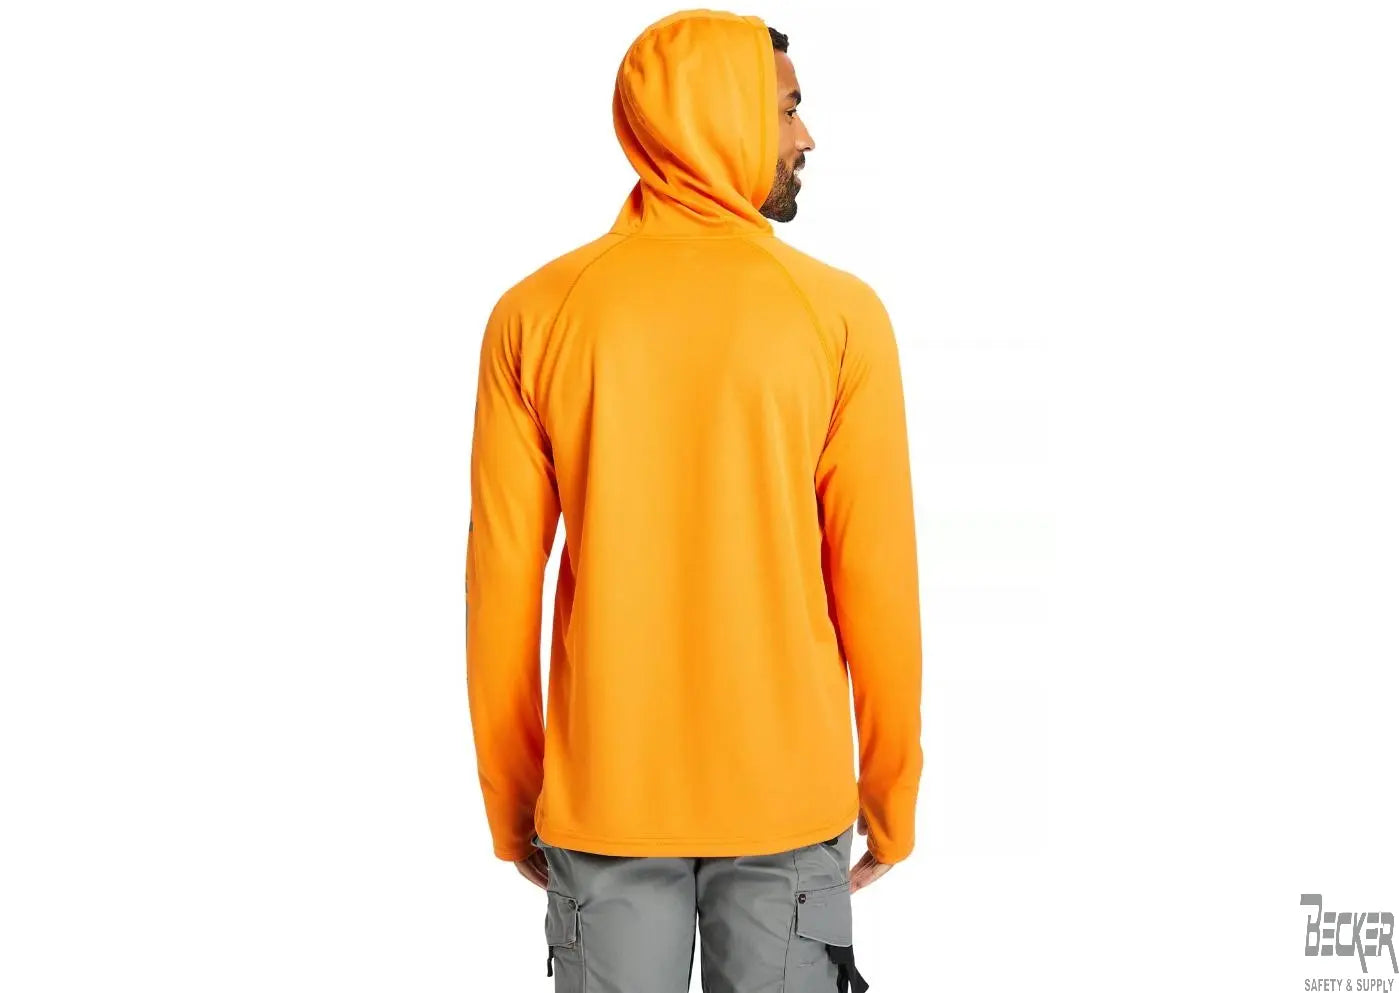 TIMBERLAND PRO - Wicking Good Hoodie, - Becker Safety and Supply